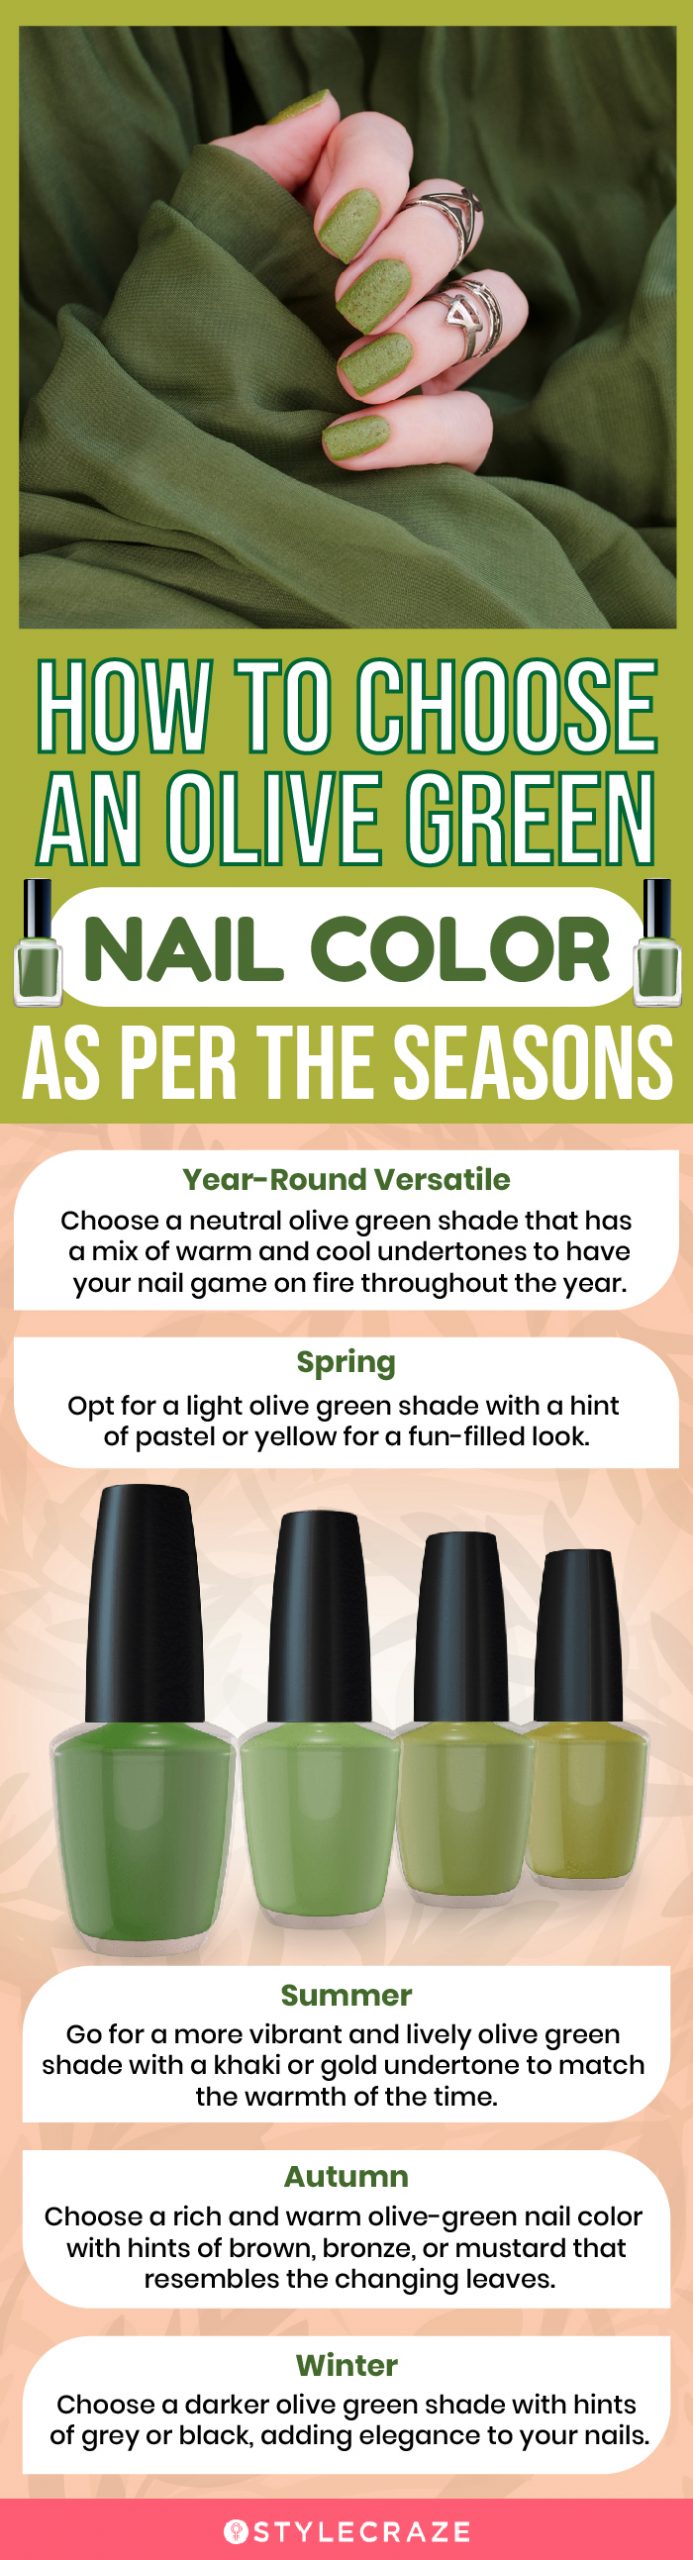 How To Choose An Olive Green Nail Color As Per The Seasons (infographic)